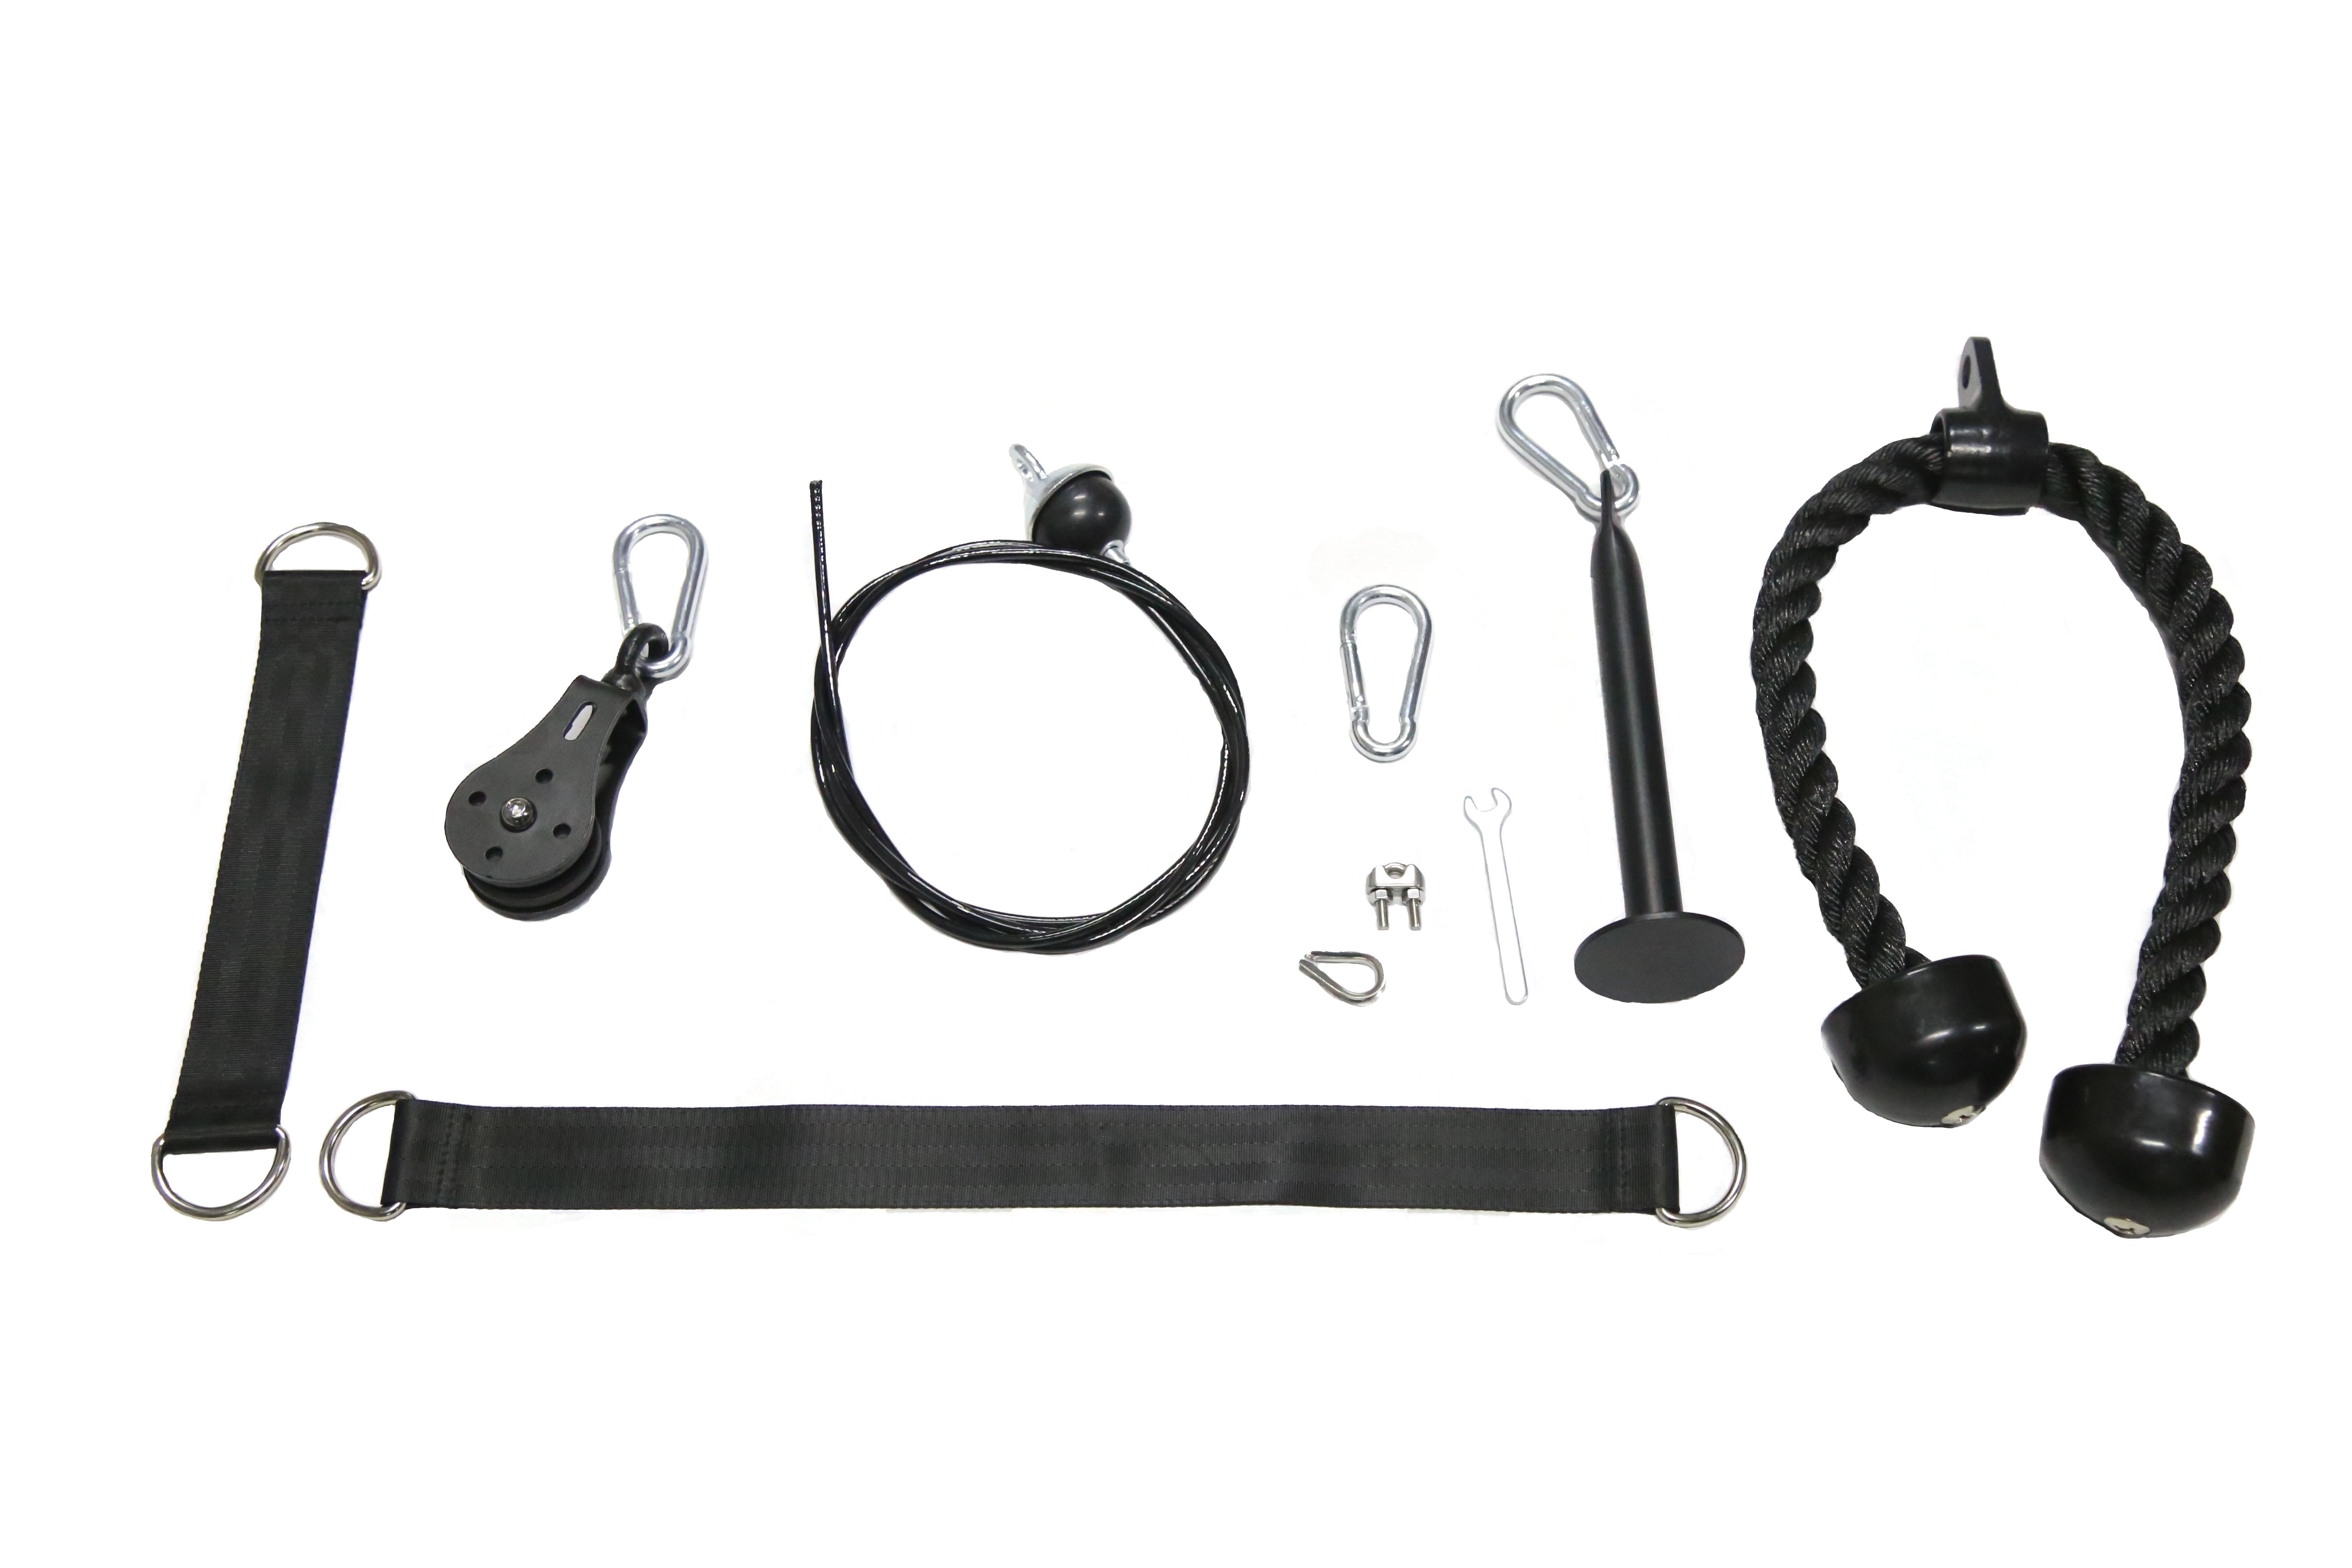 Hulkfit Cable Pulley System with Tricep Rope, Loading Pin, 3 Carabiners and Two Hanging Straps